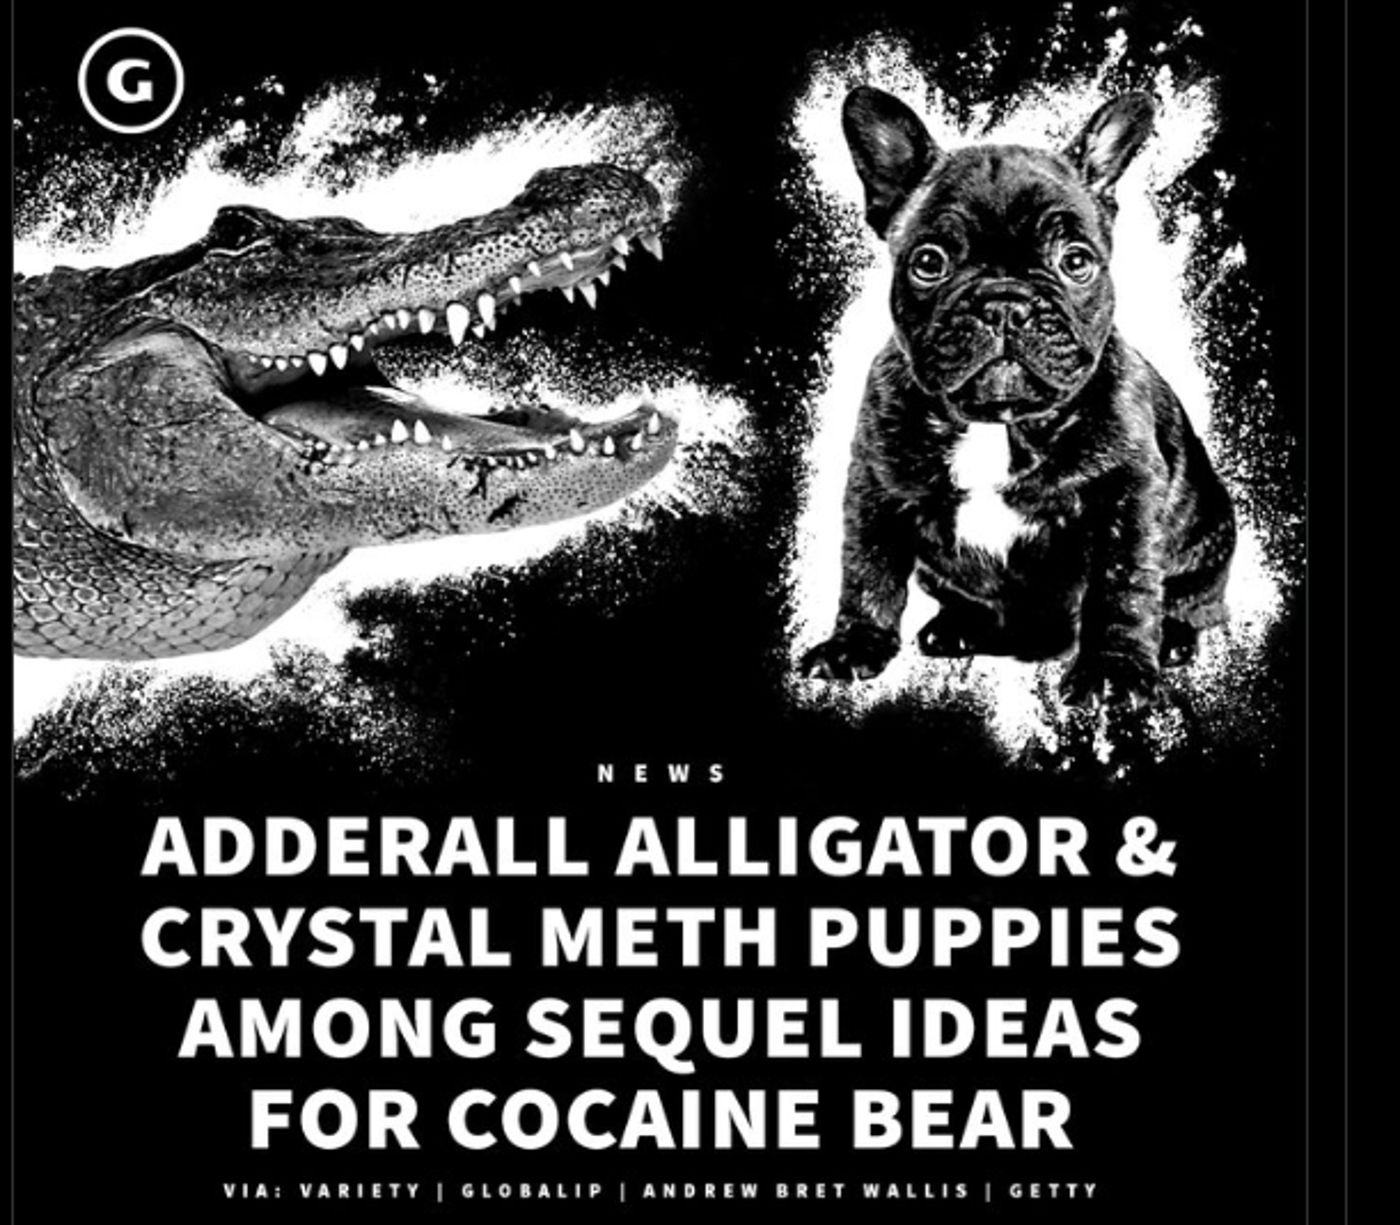 Cocaine Bear Twitter Meme Related to Adderall, Alligator and Meth Puppy